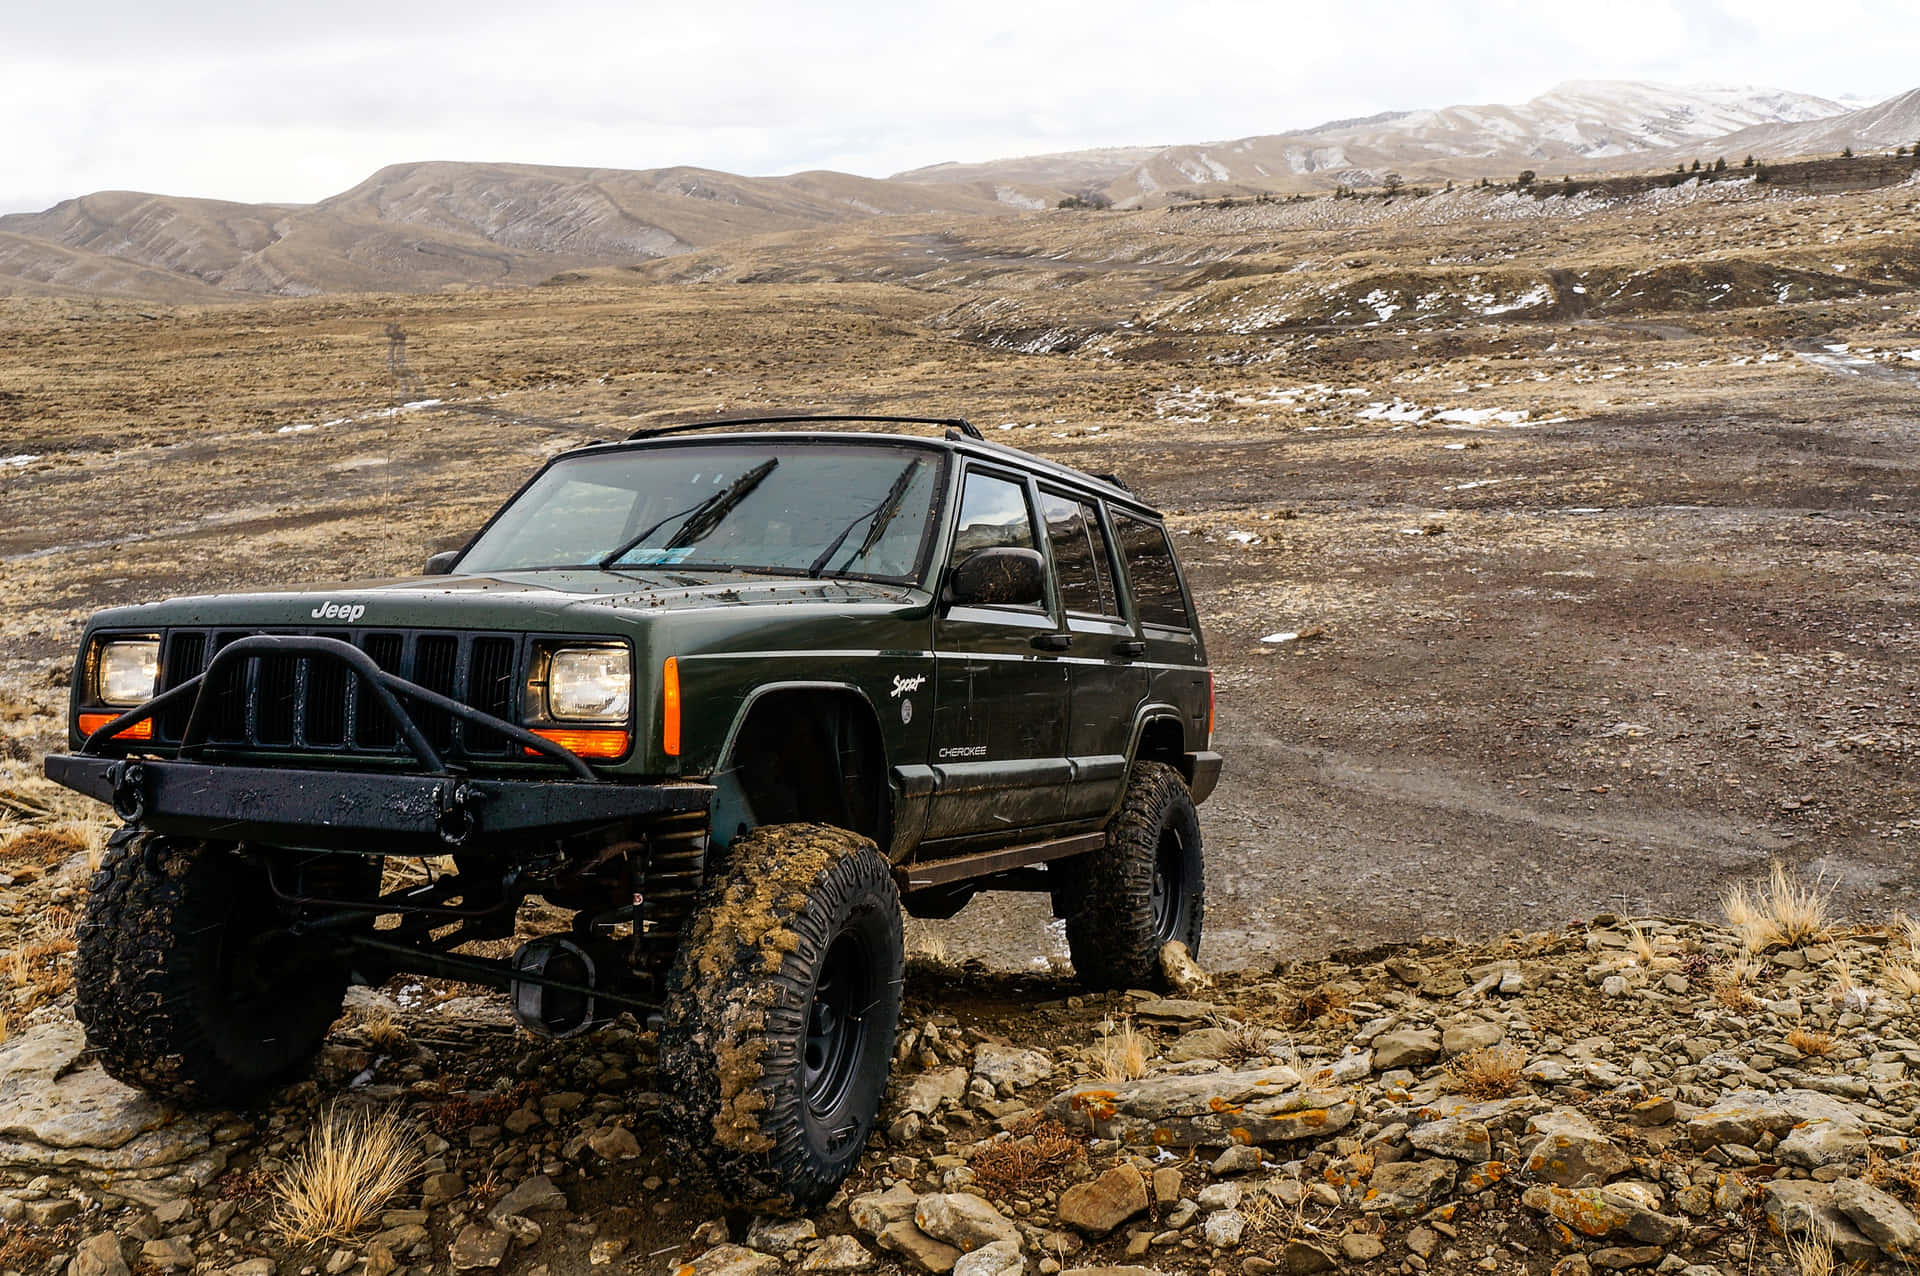 Get adventure ready with the iconic Jeep